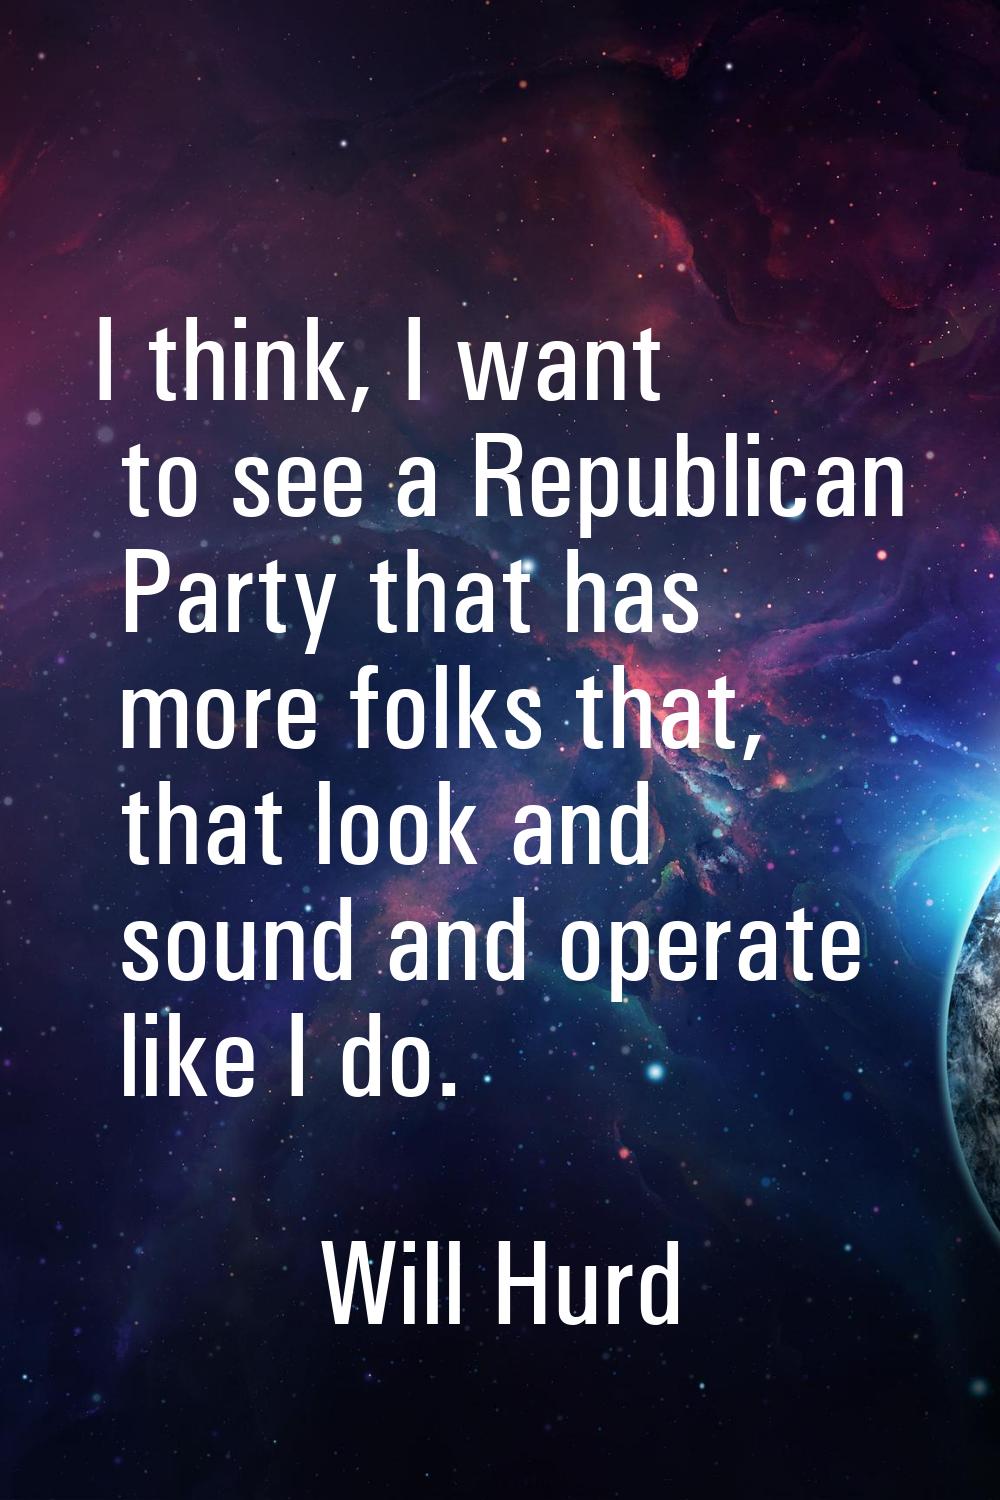 I think, I want to see a Republican Party that has more folks that, that look and sound and operate